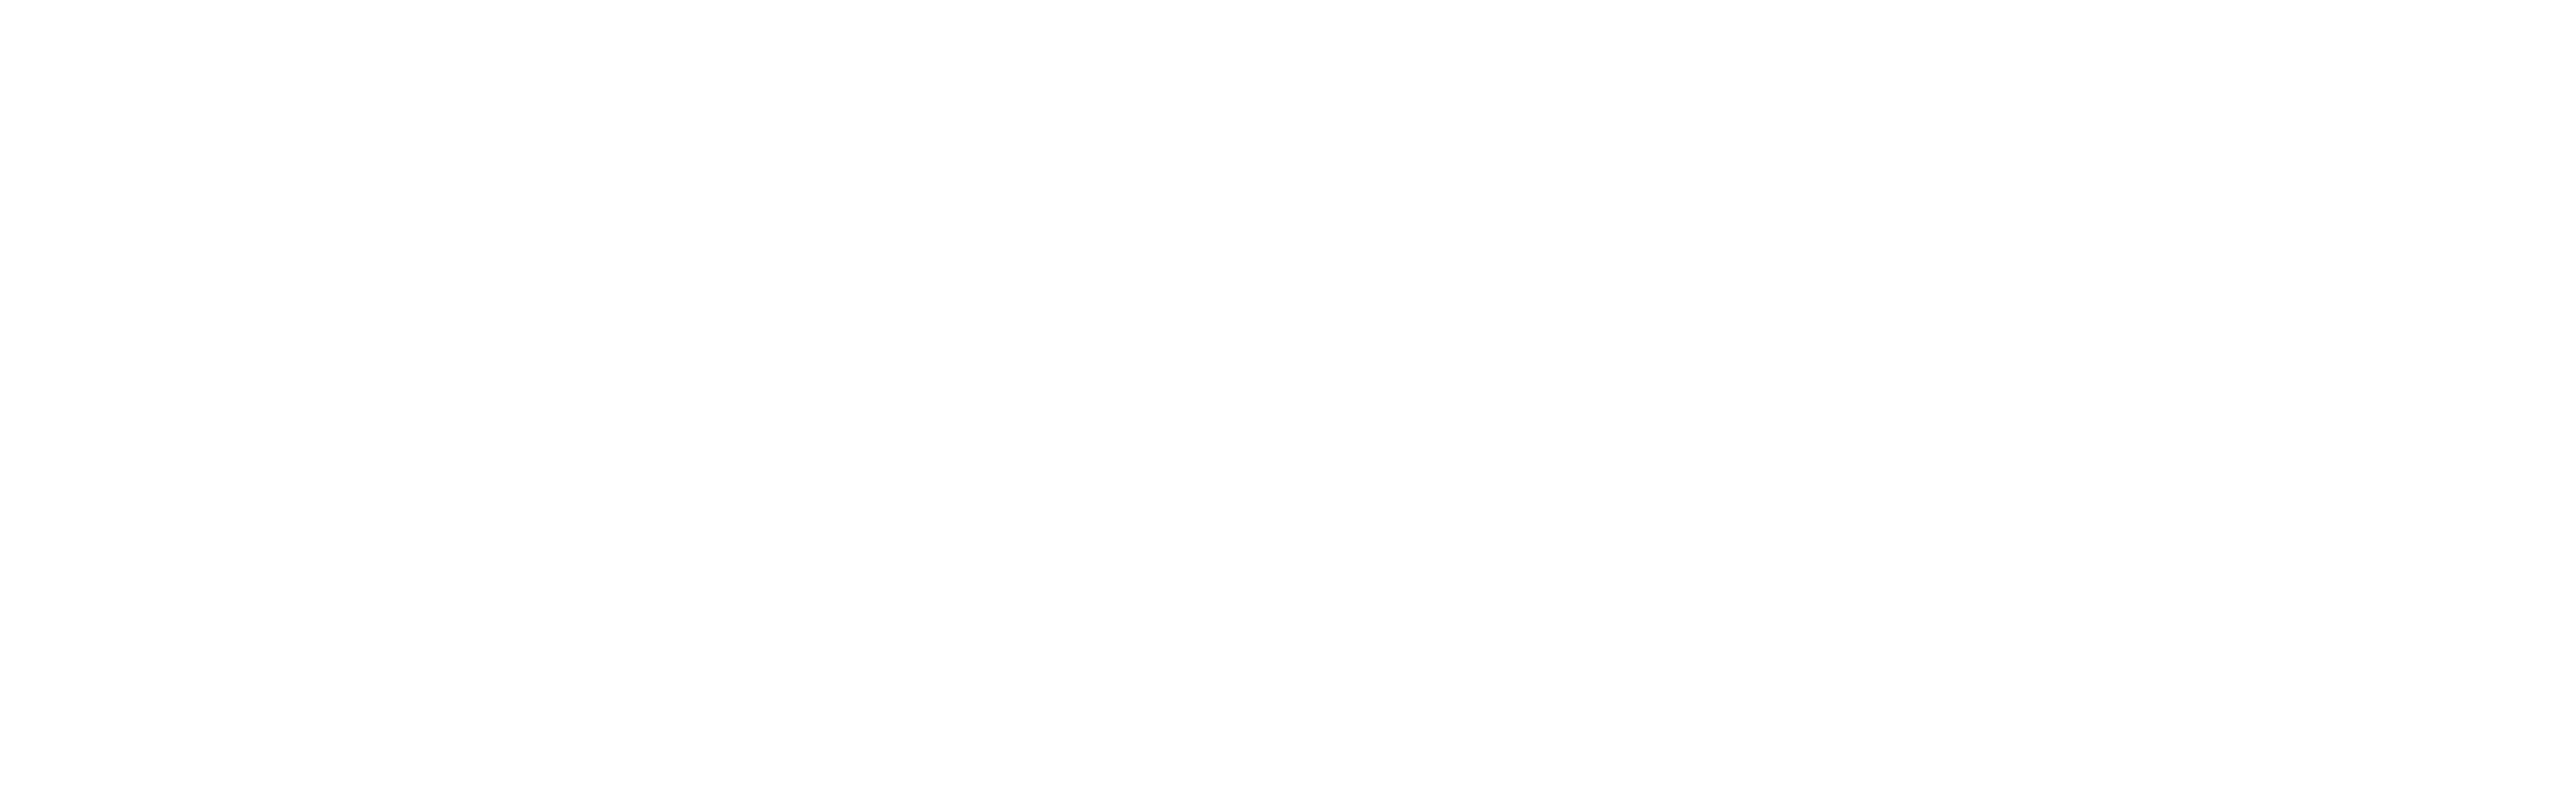 Black and white logo of HOTEL STADT HAMBURG and WESTERLAND / SYLT on the website of 12-18 Investment